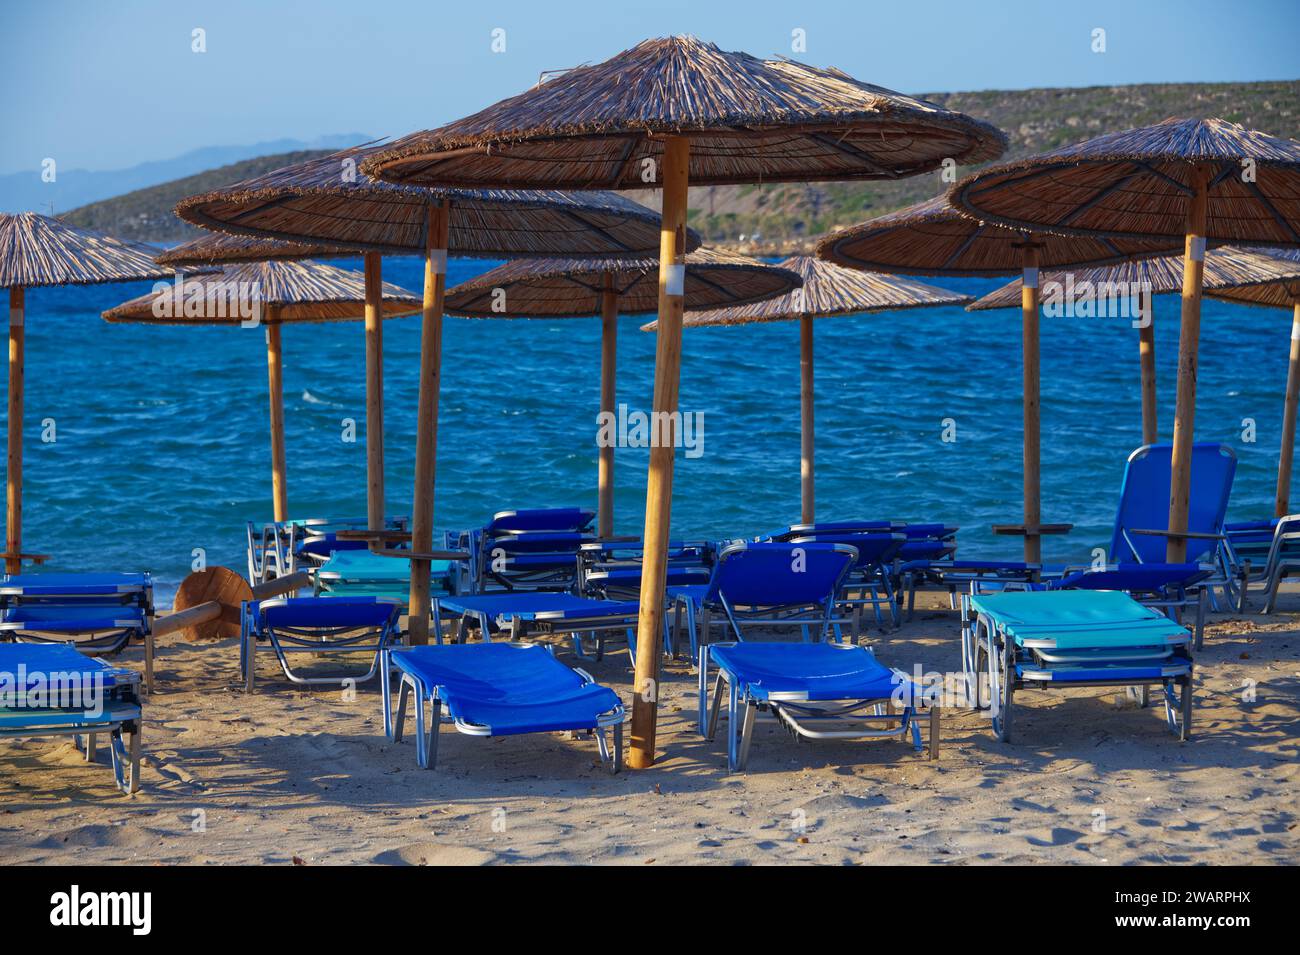 Sunbeds and parasols for the tourists on the beaches in Greece Stock Photo